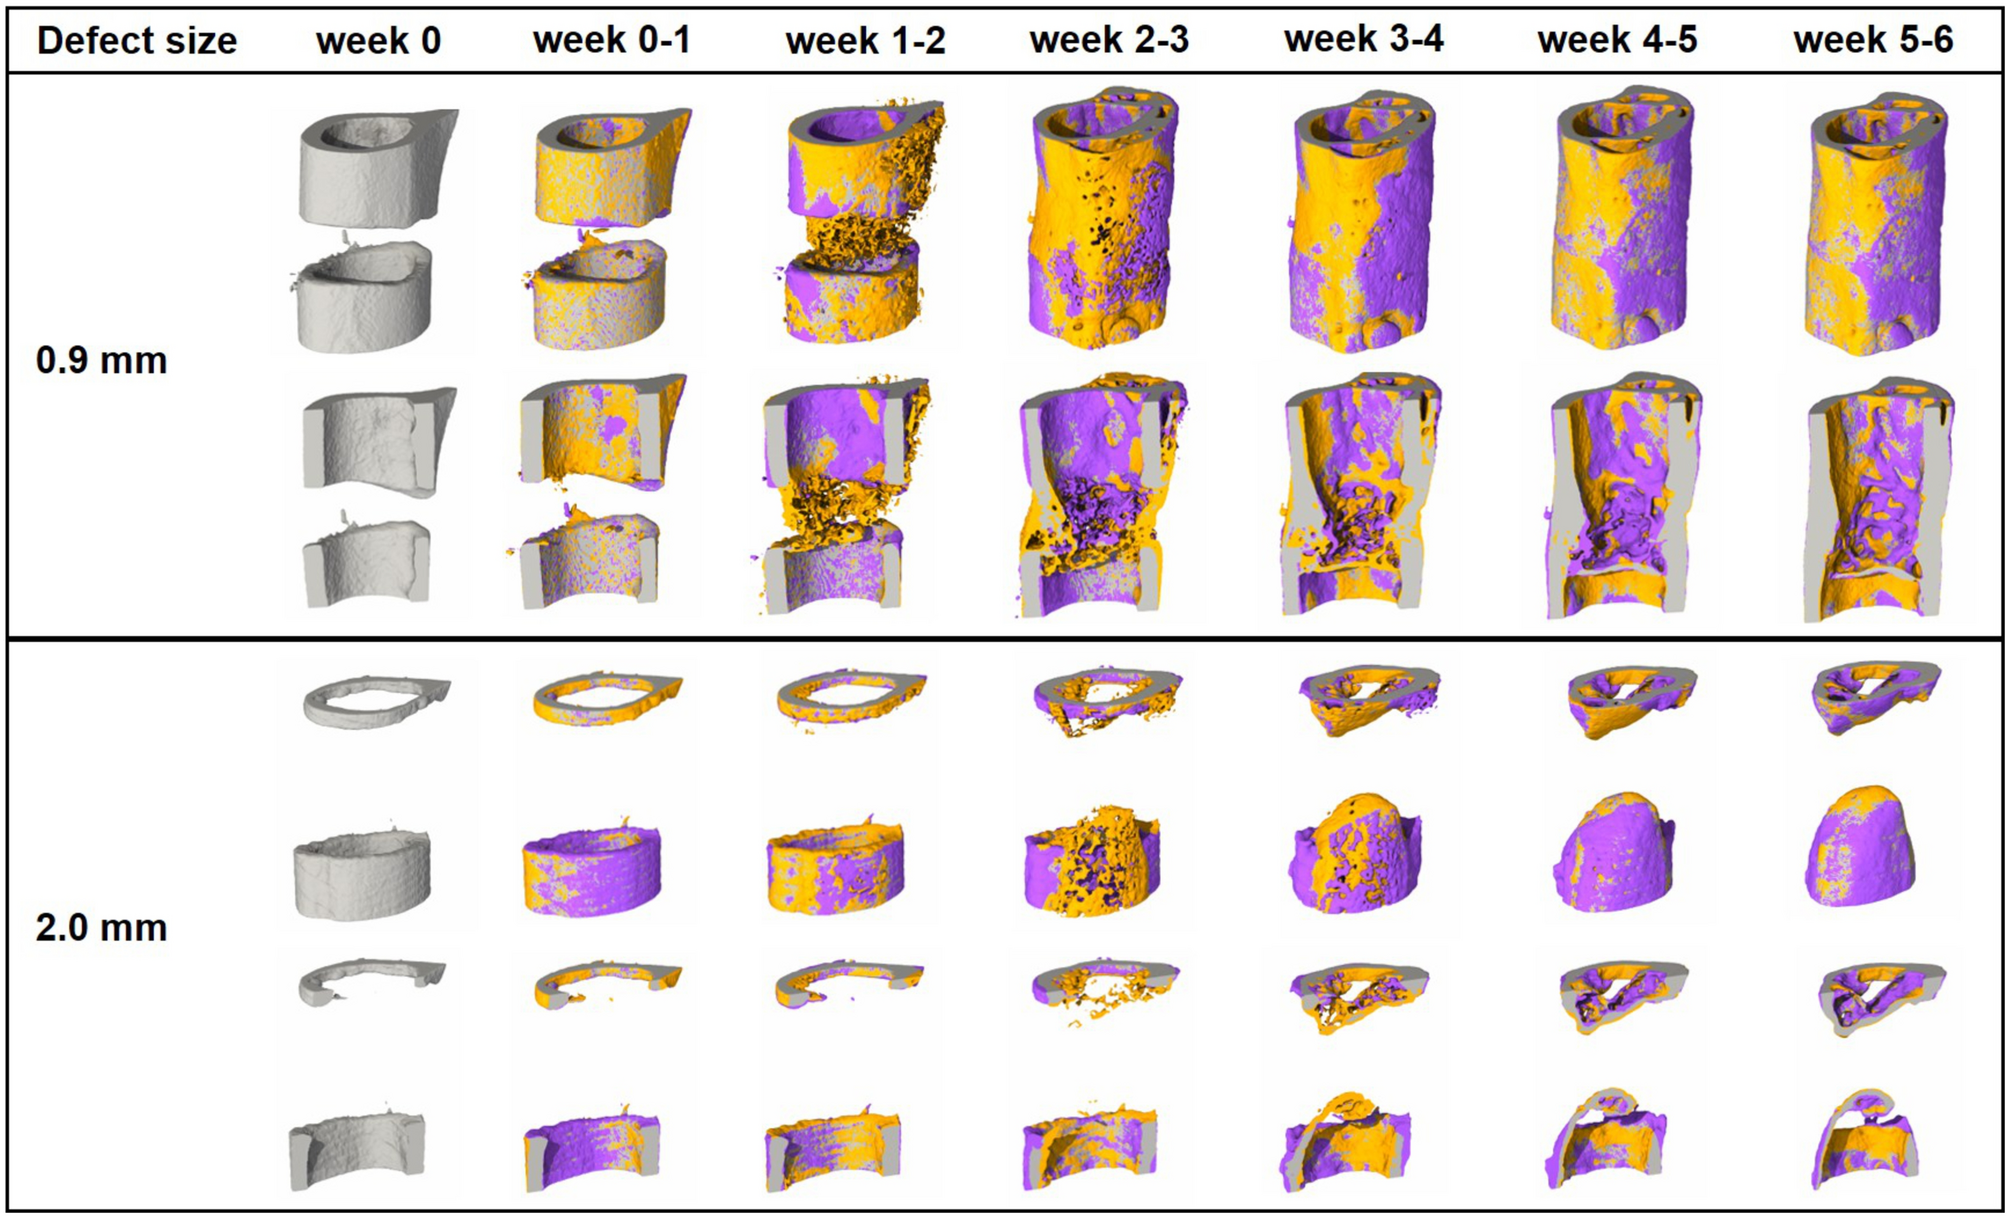 Spatio-temporal characterization of fracture healing patterns and  assessment of biomaterials by time-lapsed in vivo micro-computed tomography  | Scientific Reports